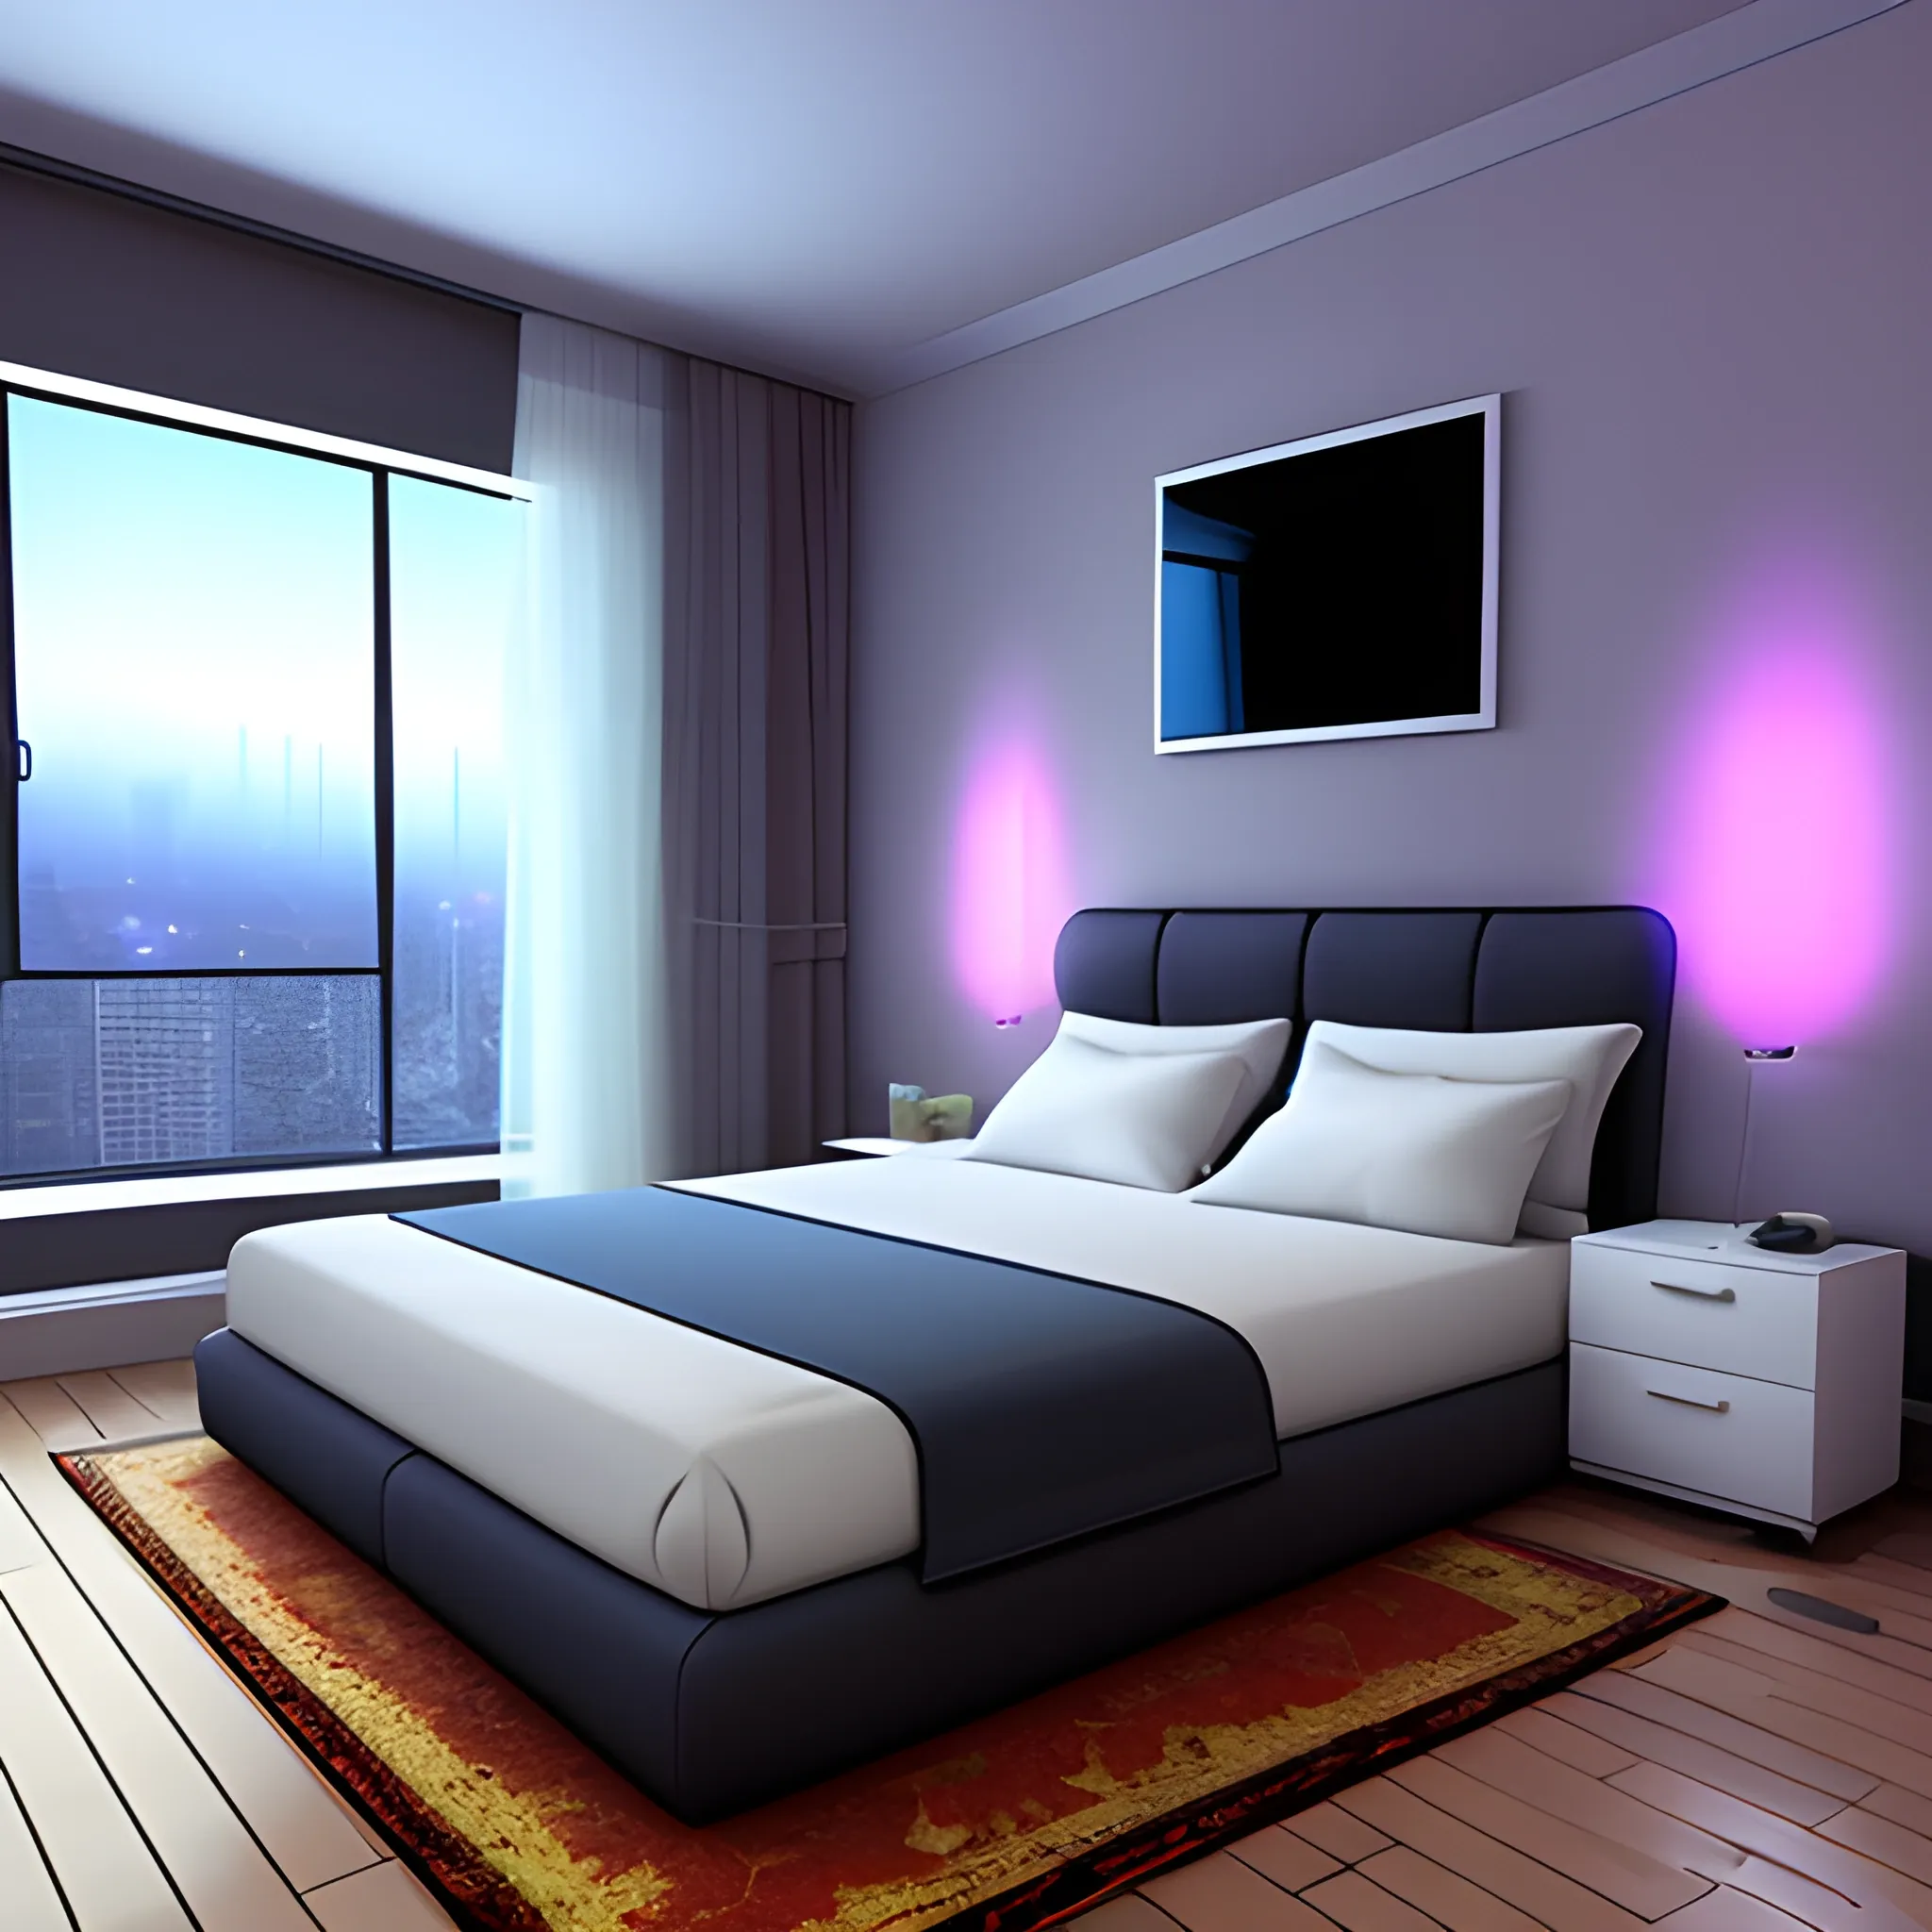 Inside a game, teenager's room, virtual reality headsets on top of the bed, 3D